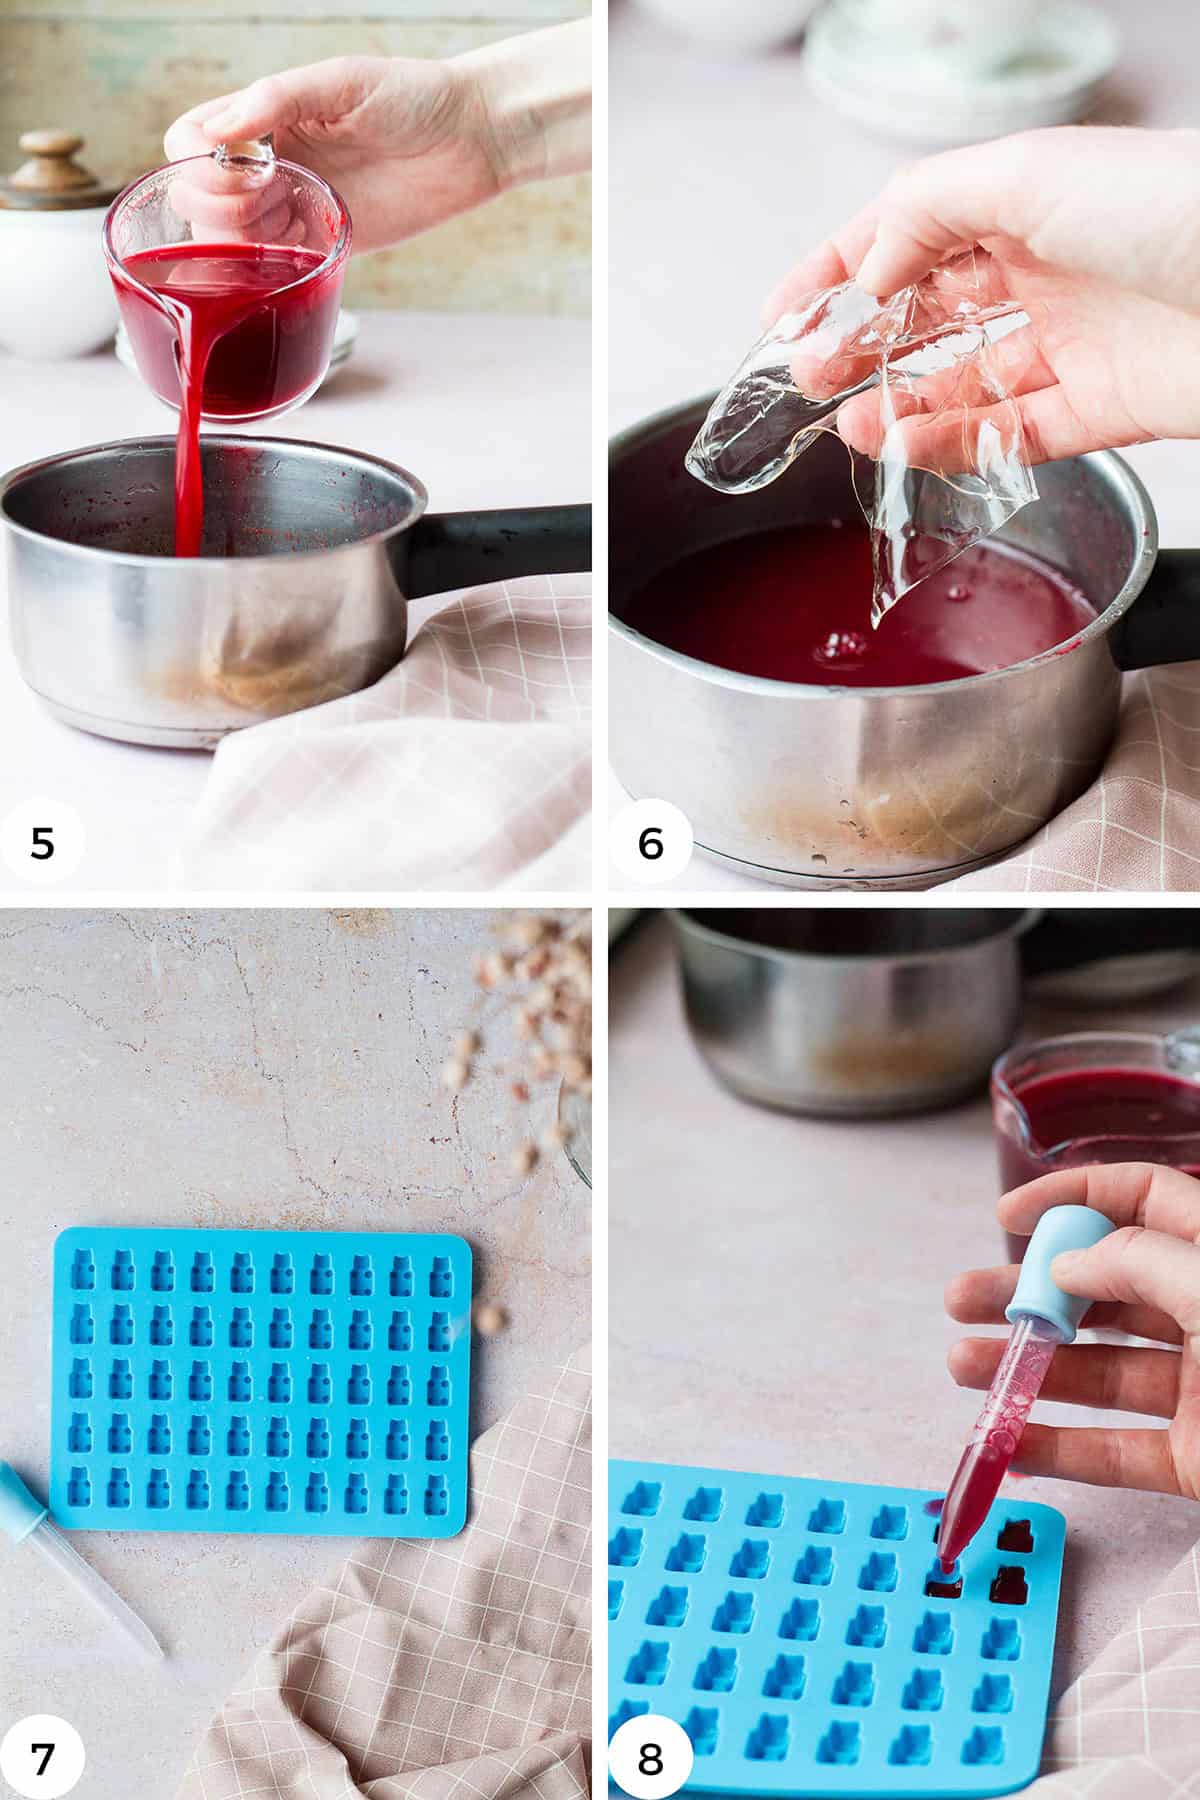 Steps to make the gummy bear mixture and how to fill the molds.